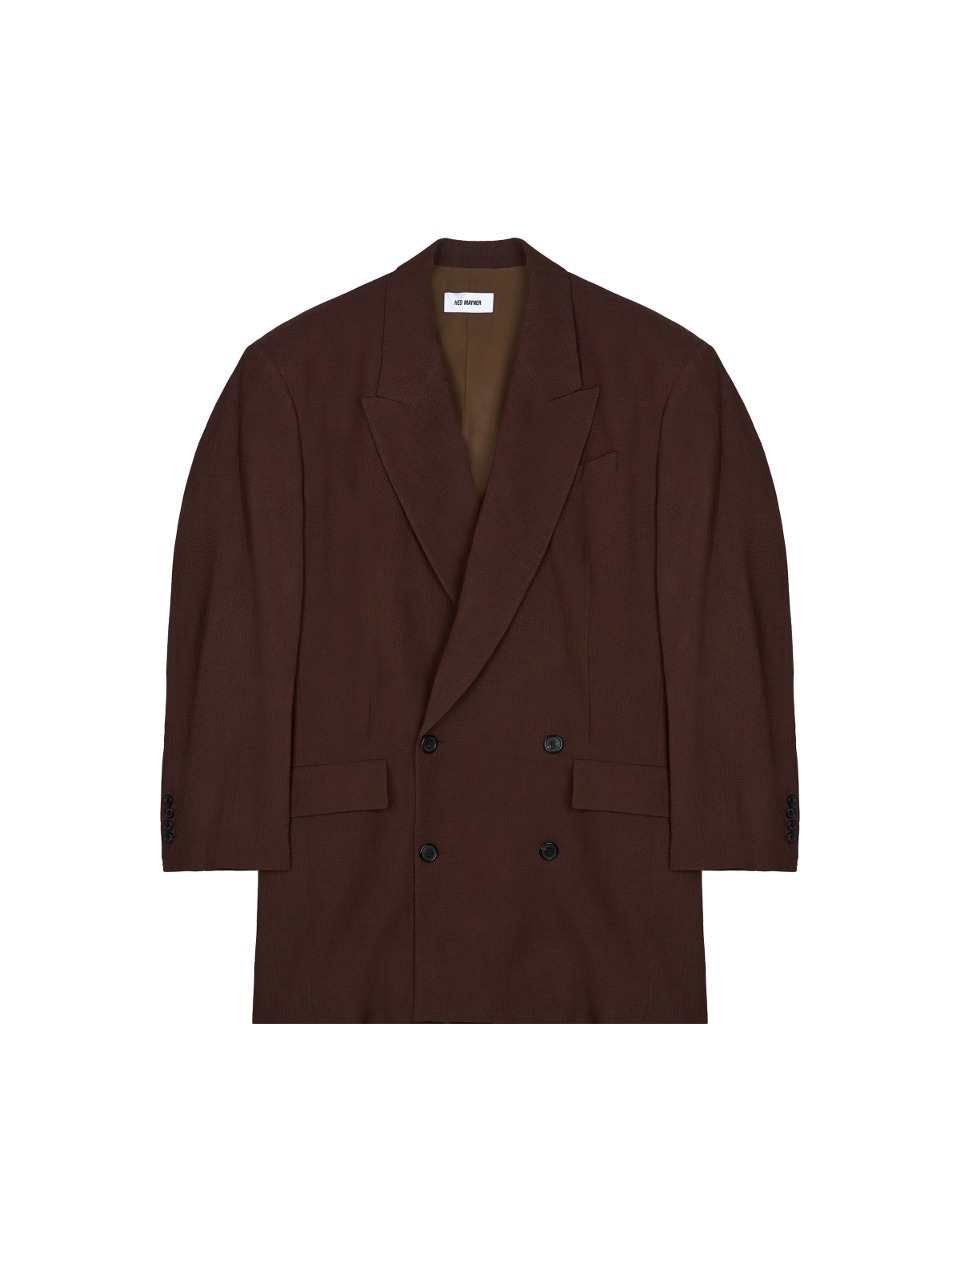 HED MAYNER - DOUBLE COAT (CHOCOLATE BROWN)